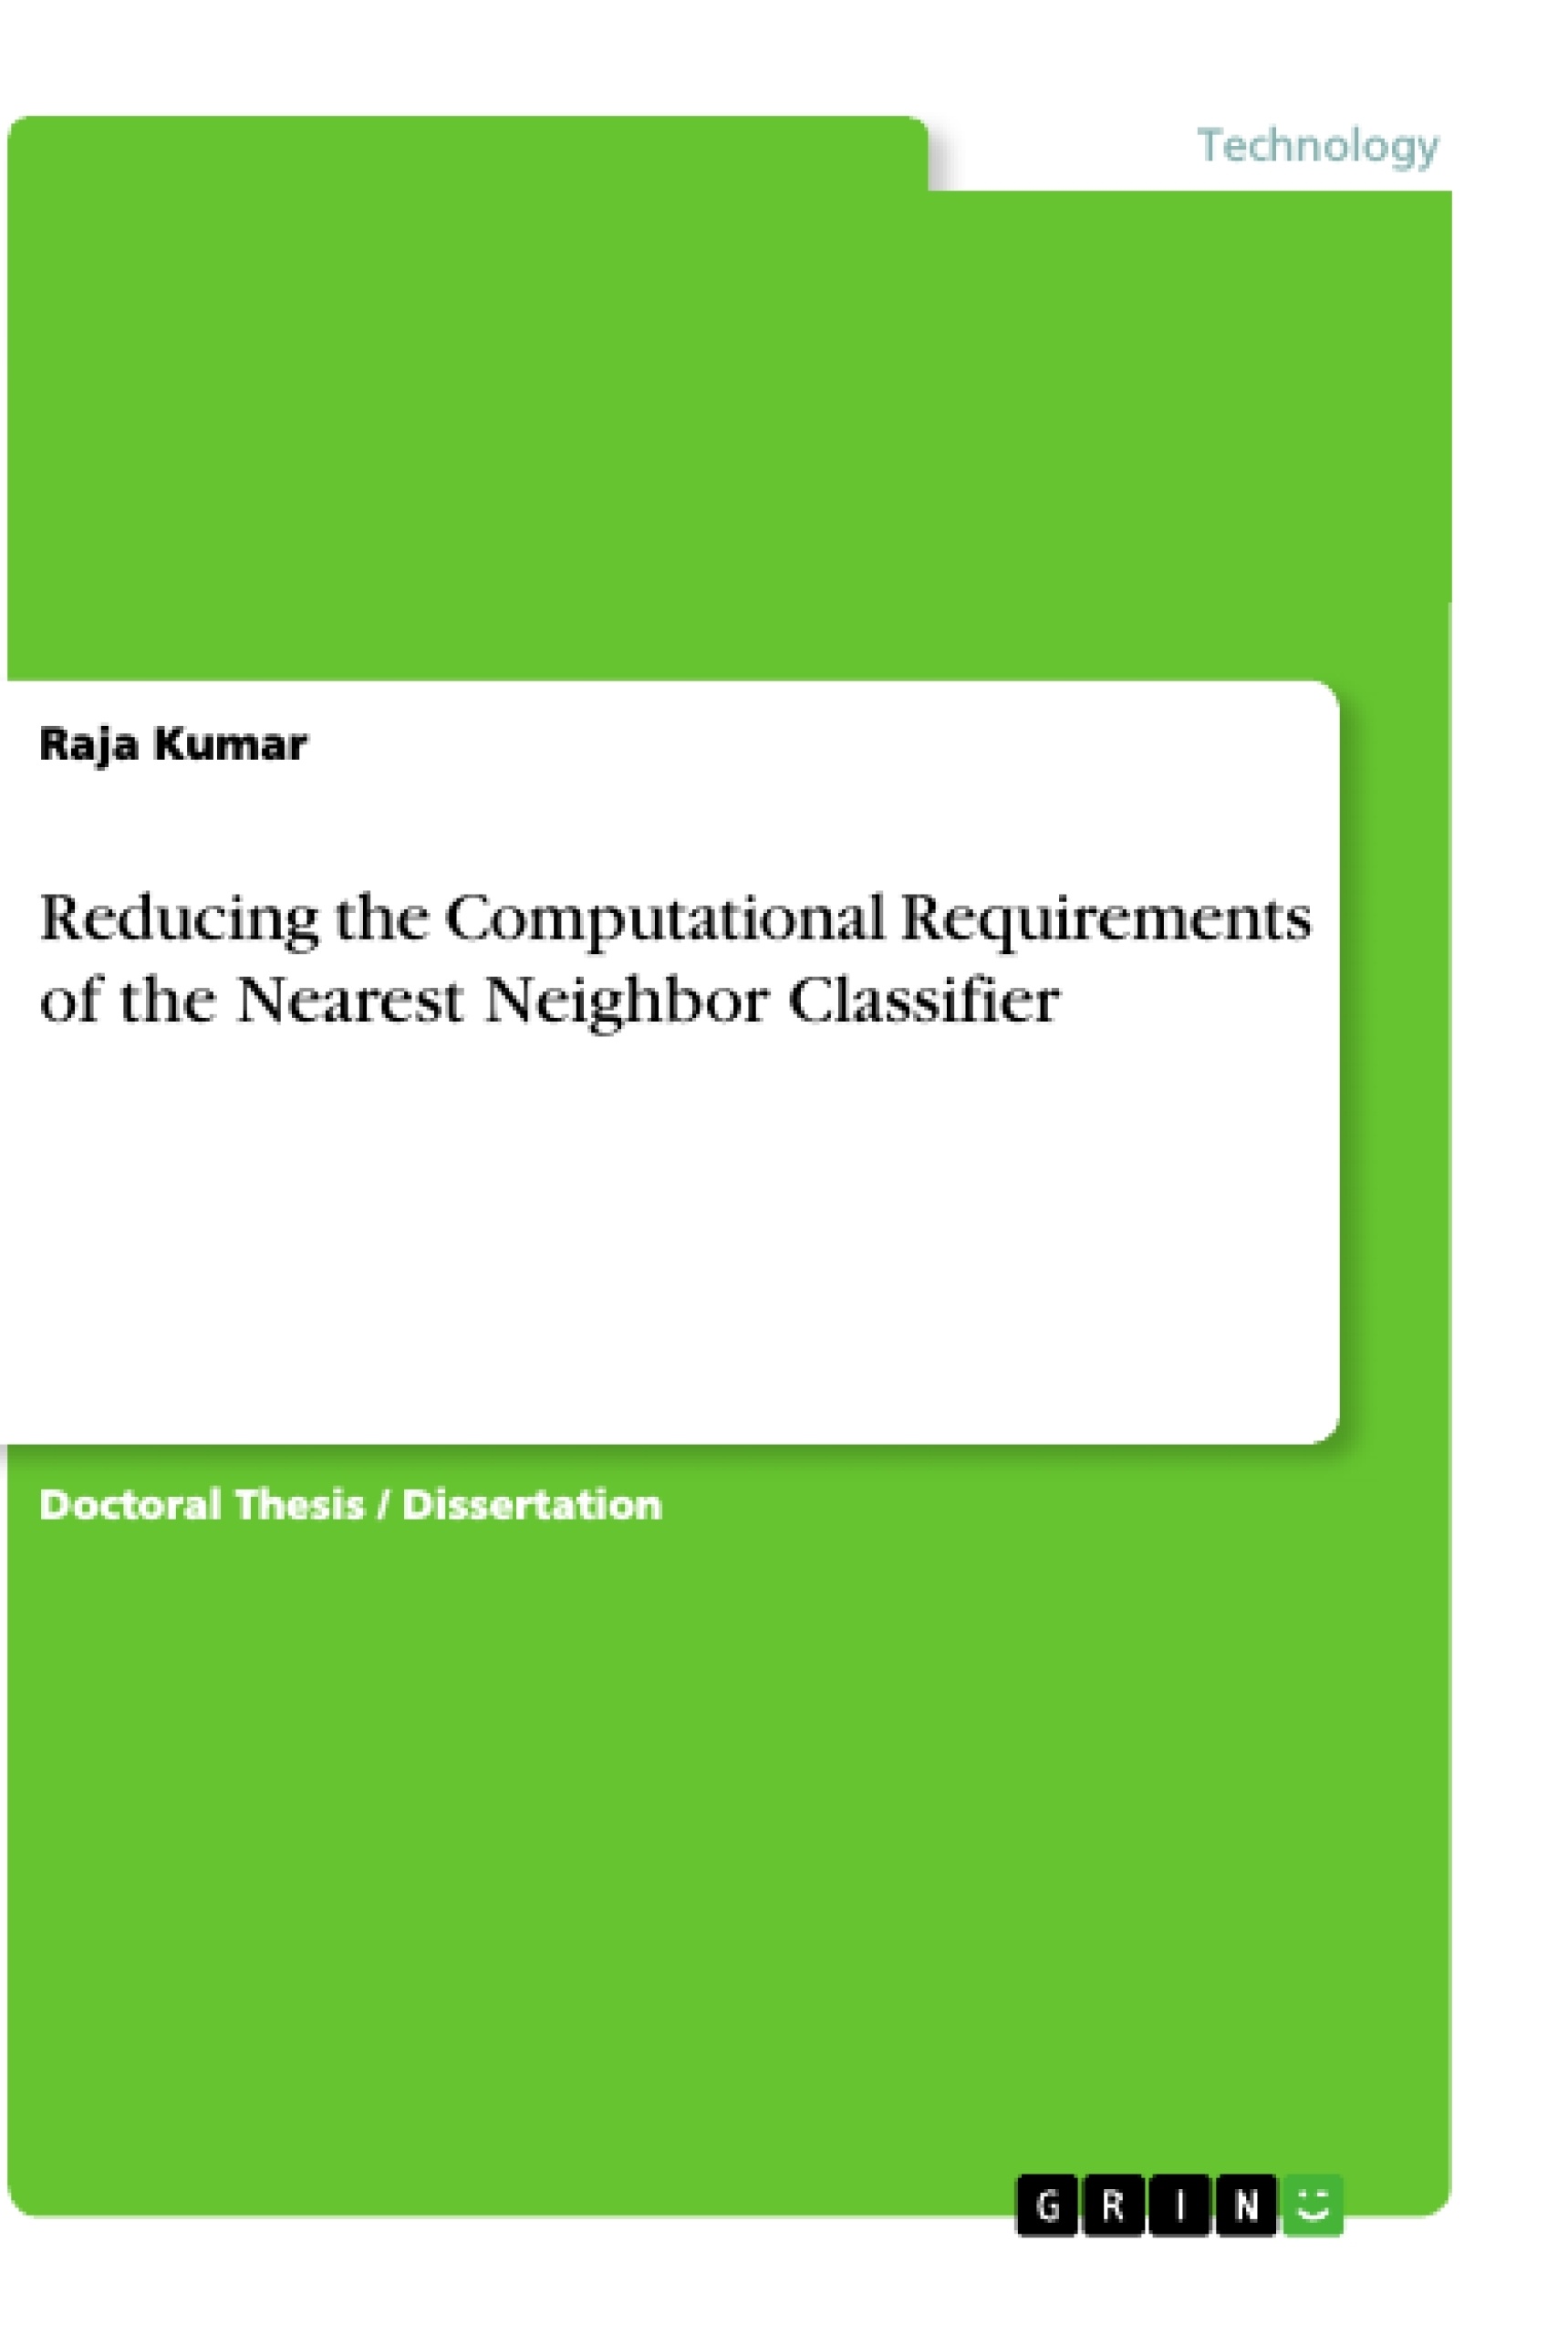 Title: Reducing the Computational Requirements of the Nearest Neighbor Classifier